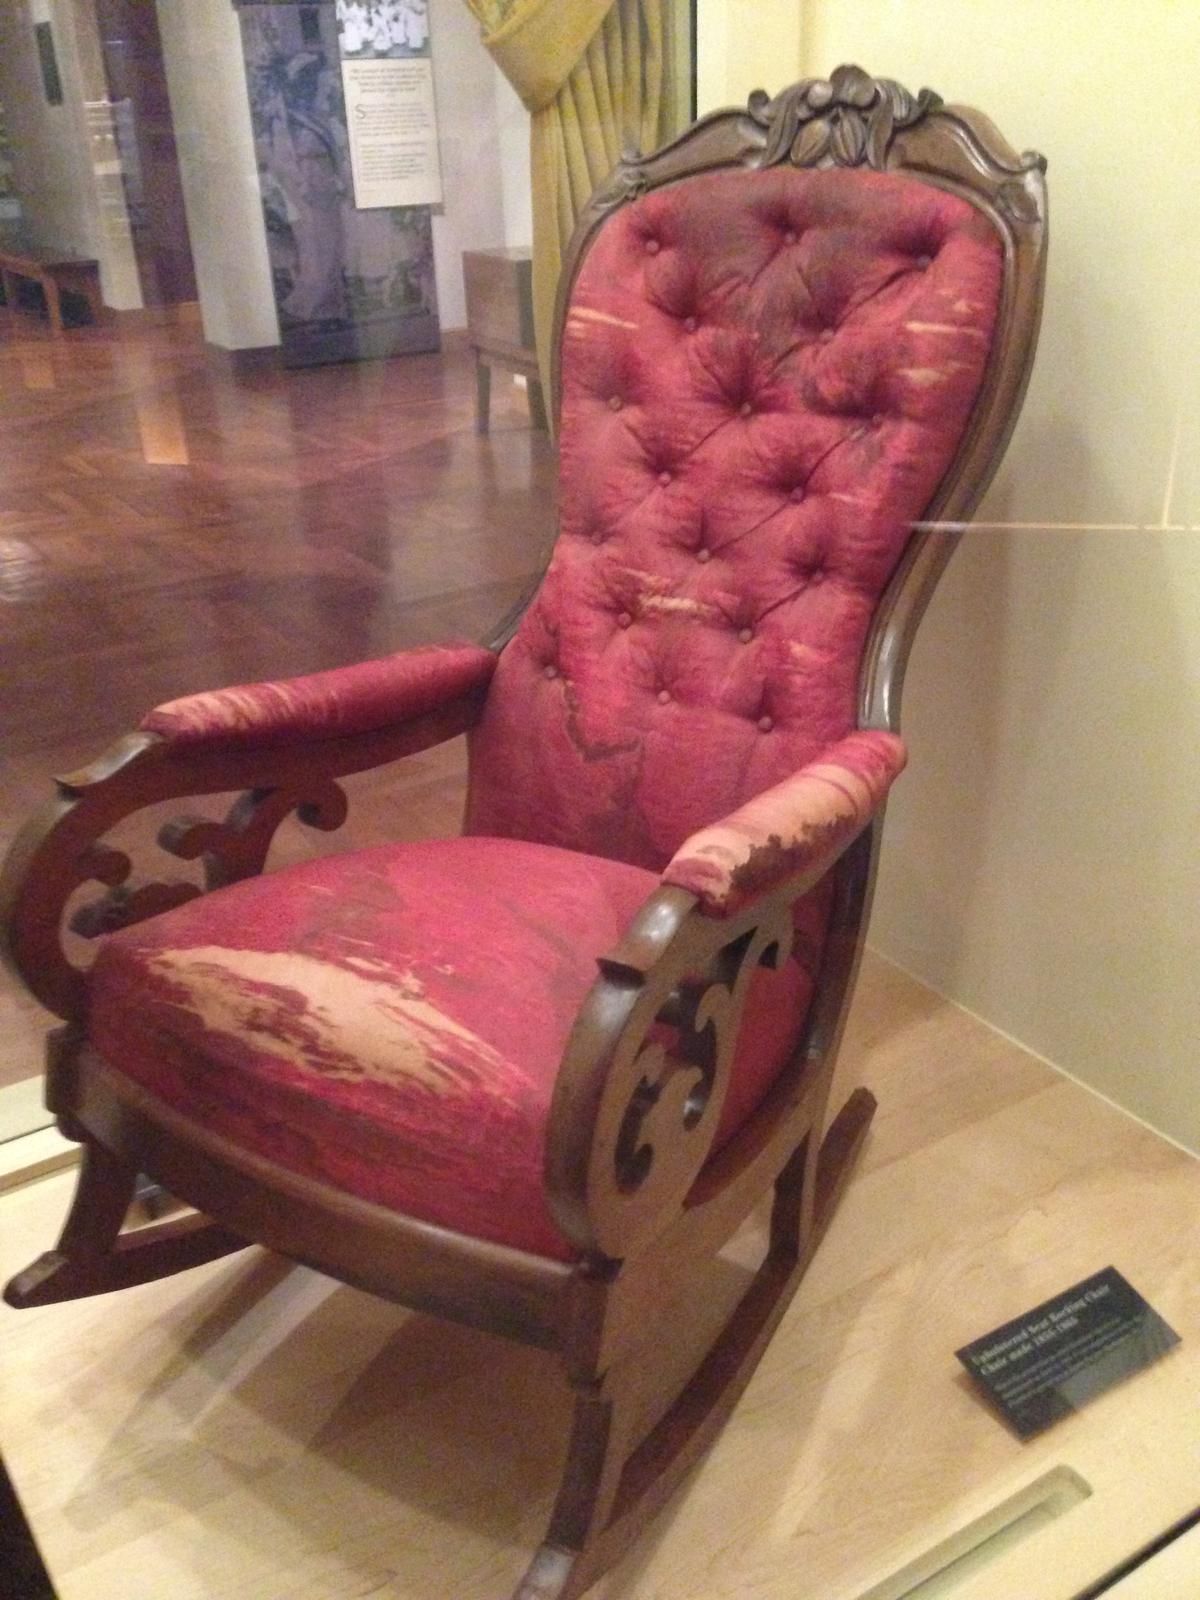 Lincoln's Bloody Chair